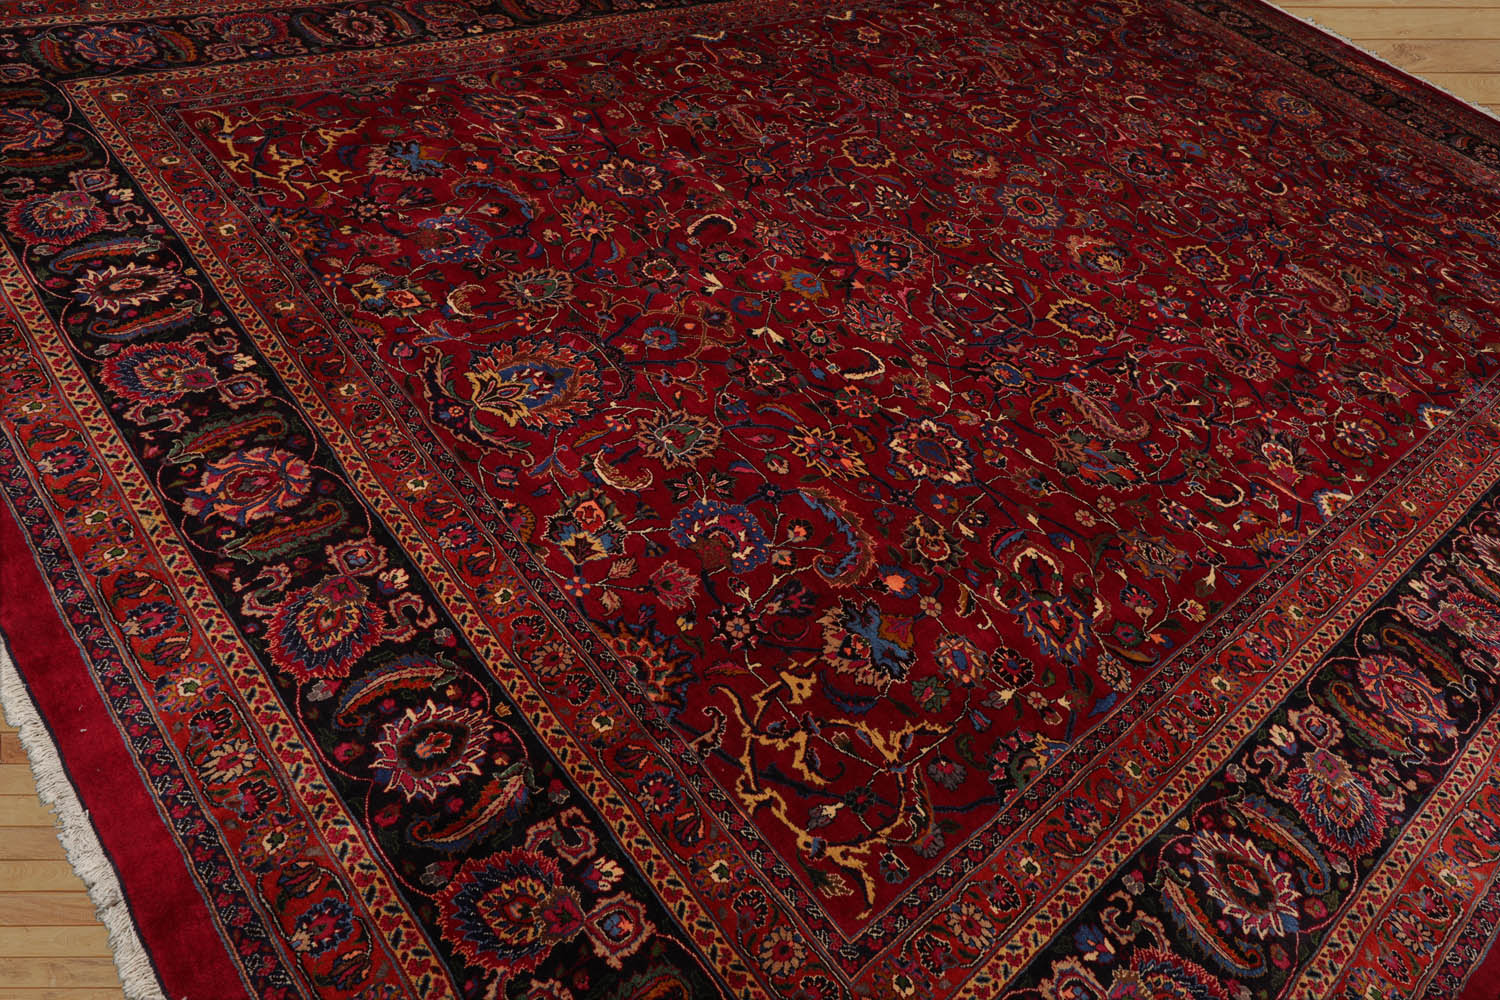 Randon Palace Hand Knotted Persian 100% Wool Mashad Traditional Oriental Area Rug Burgundy, Midnight Blue  Color